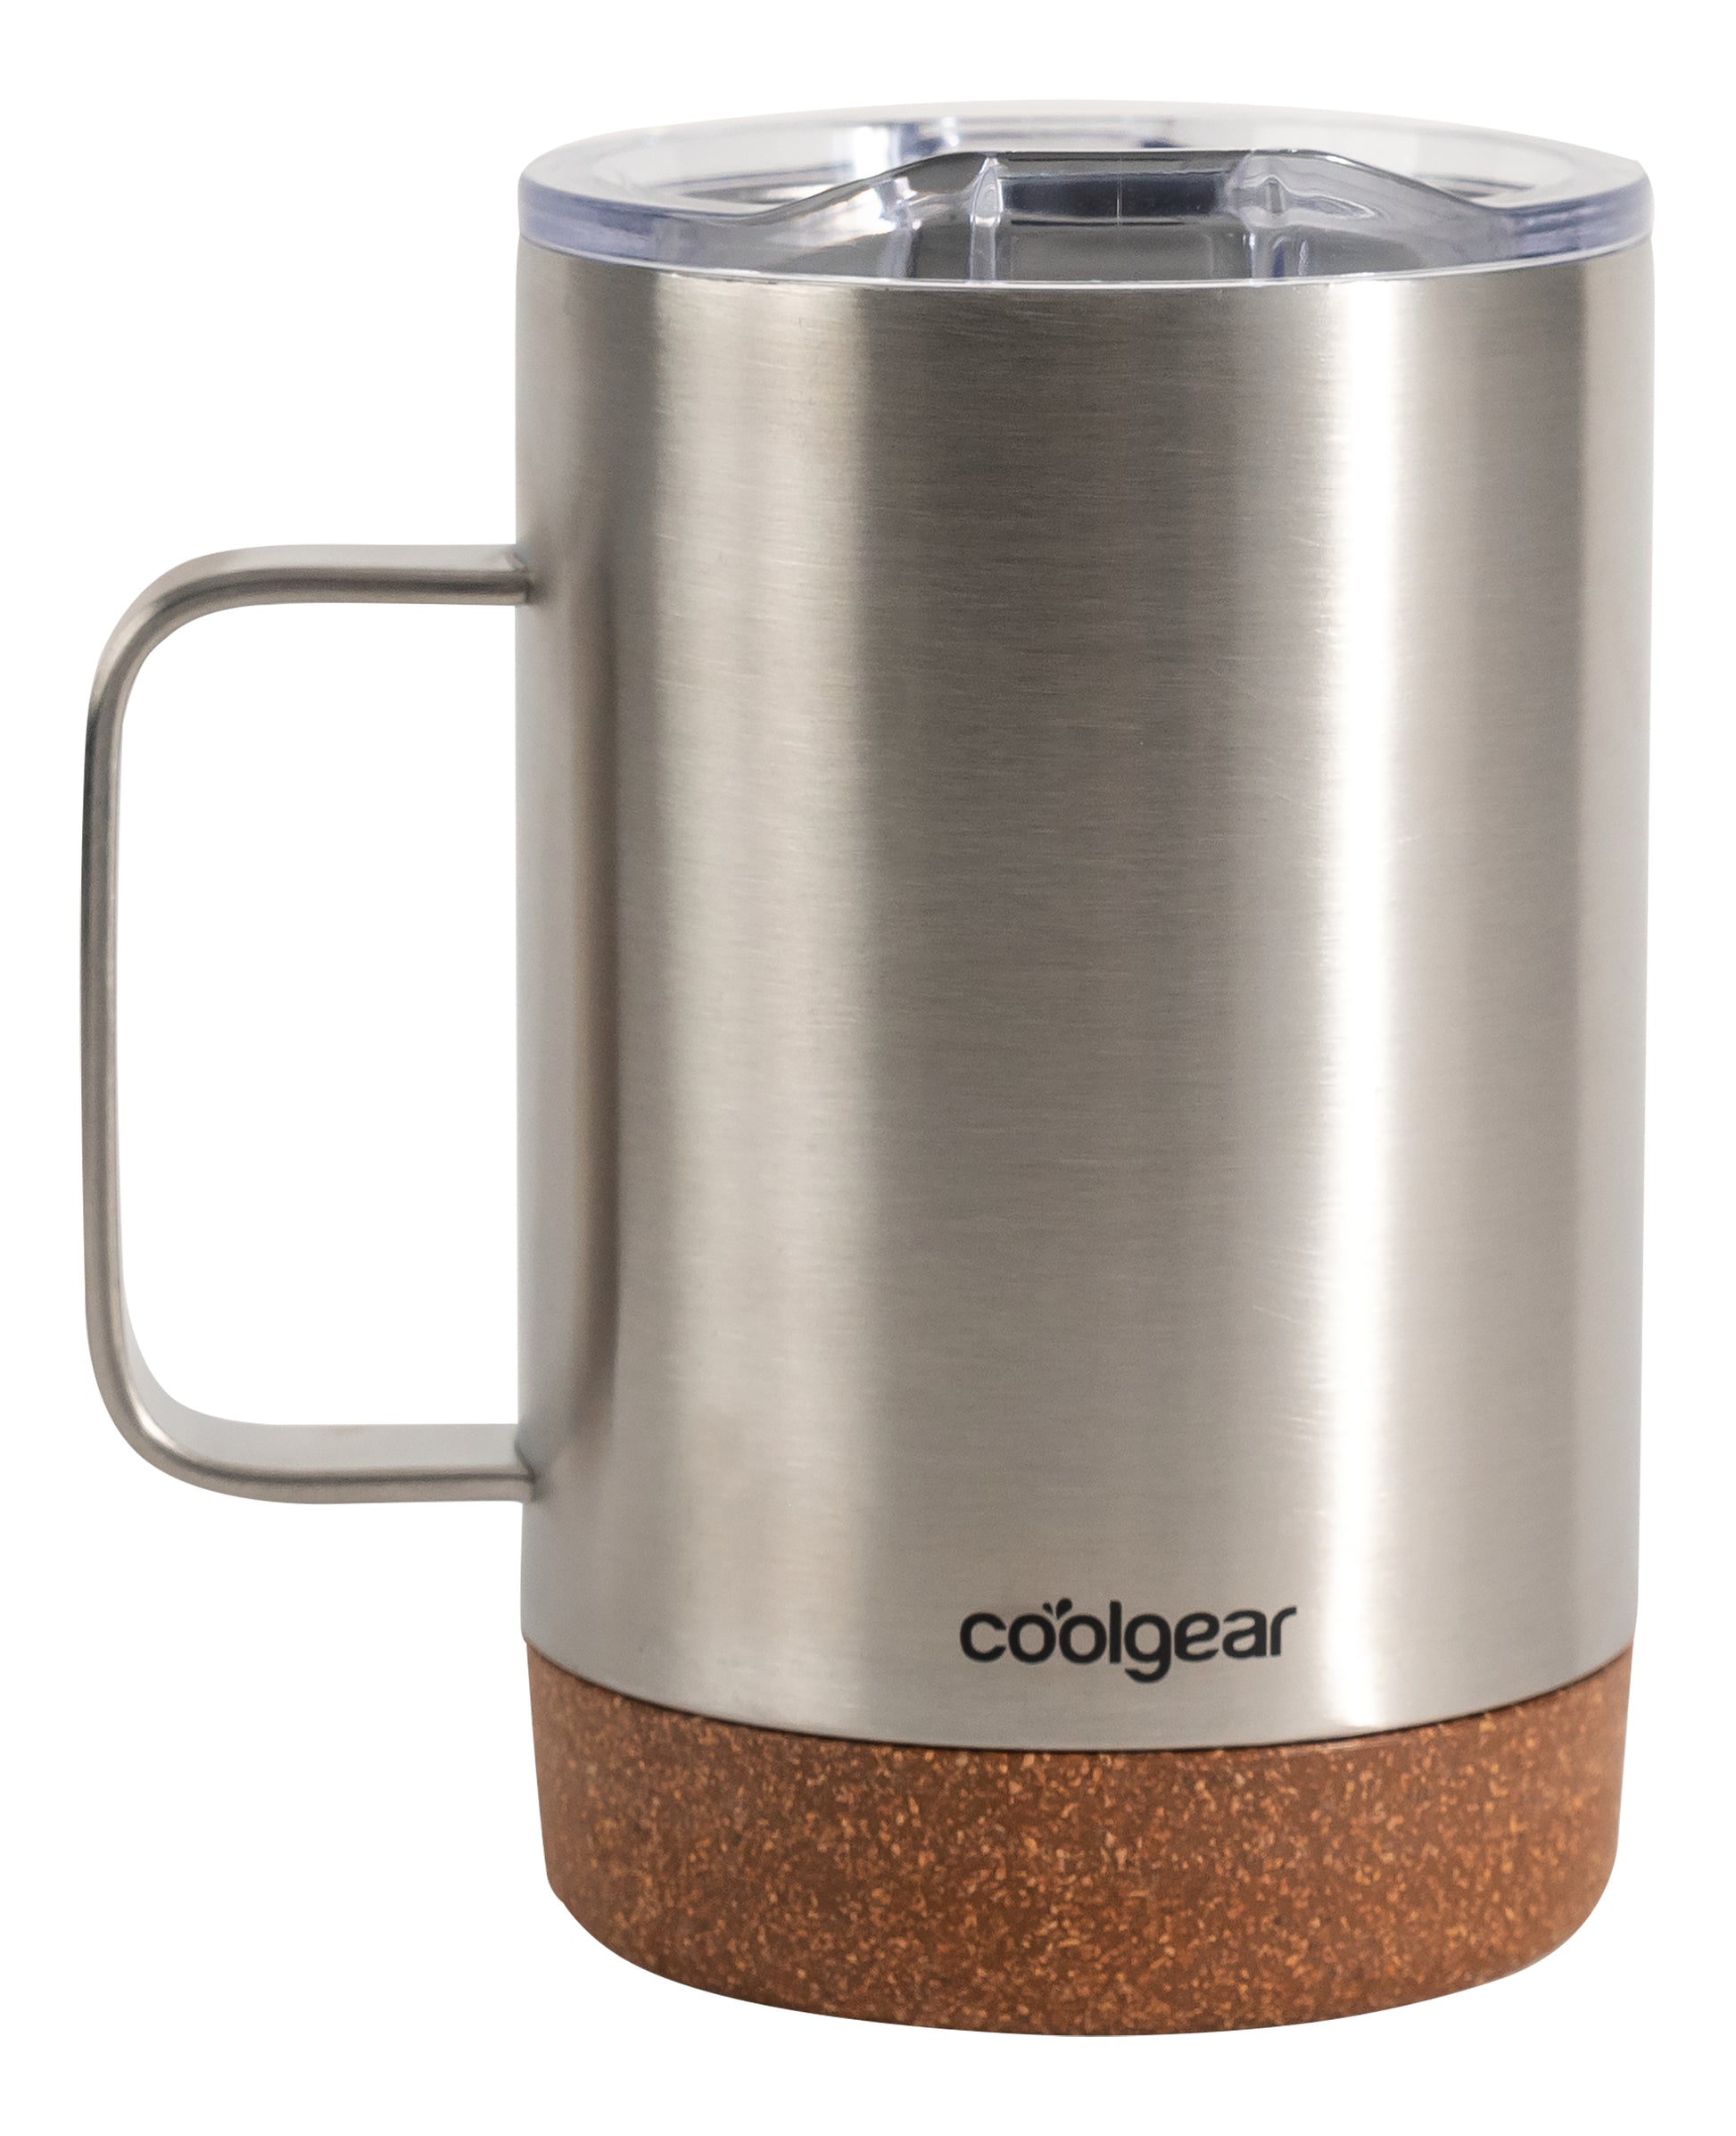 Tiken 11 Oz Insulated Coffee Mug with Lid, Stainless Steel Thermal